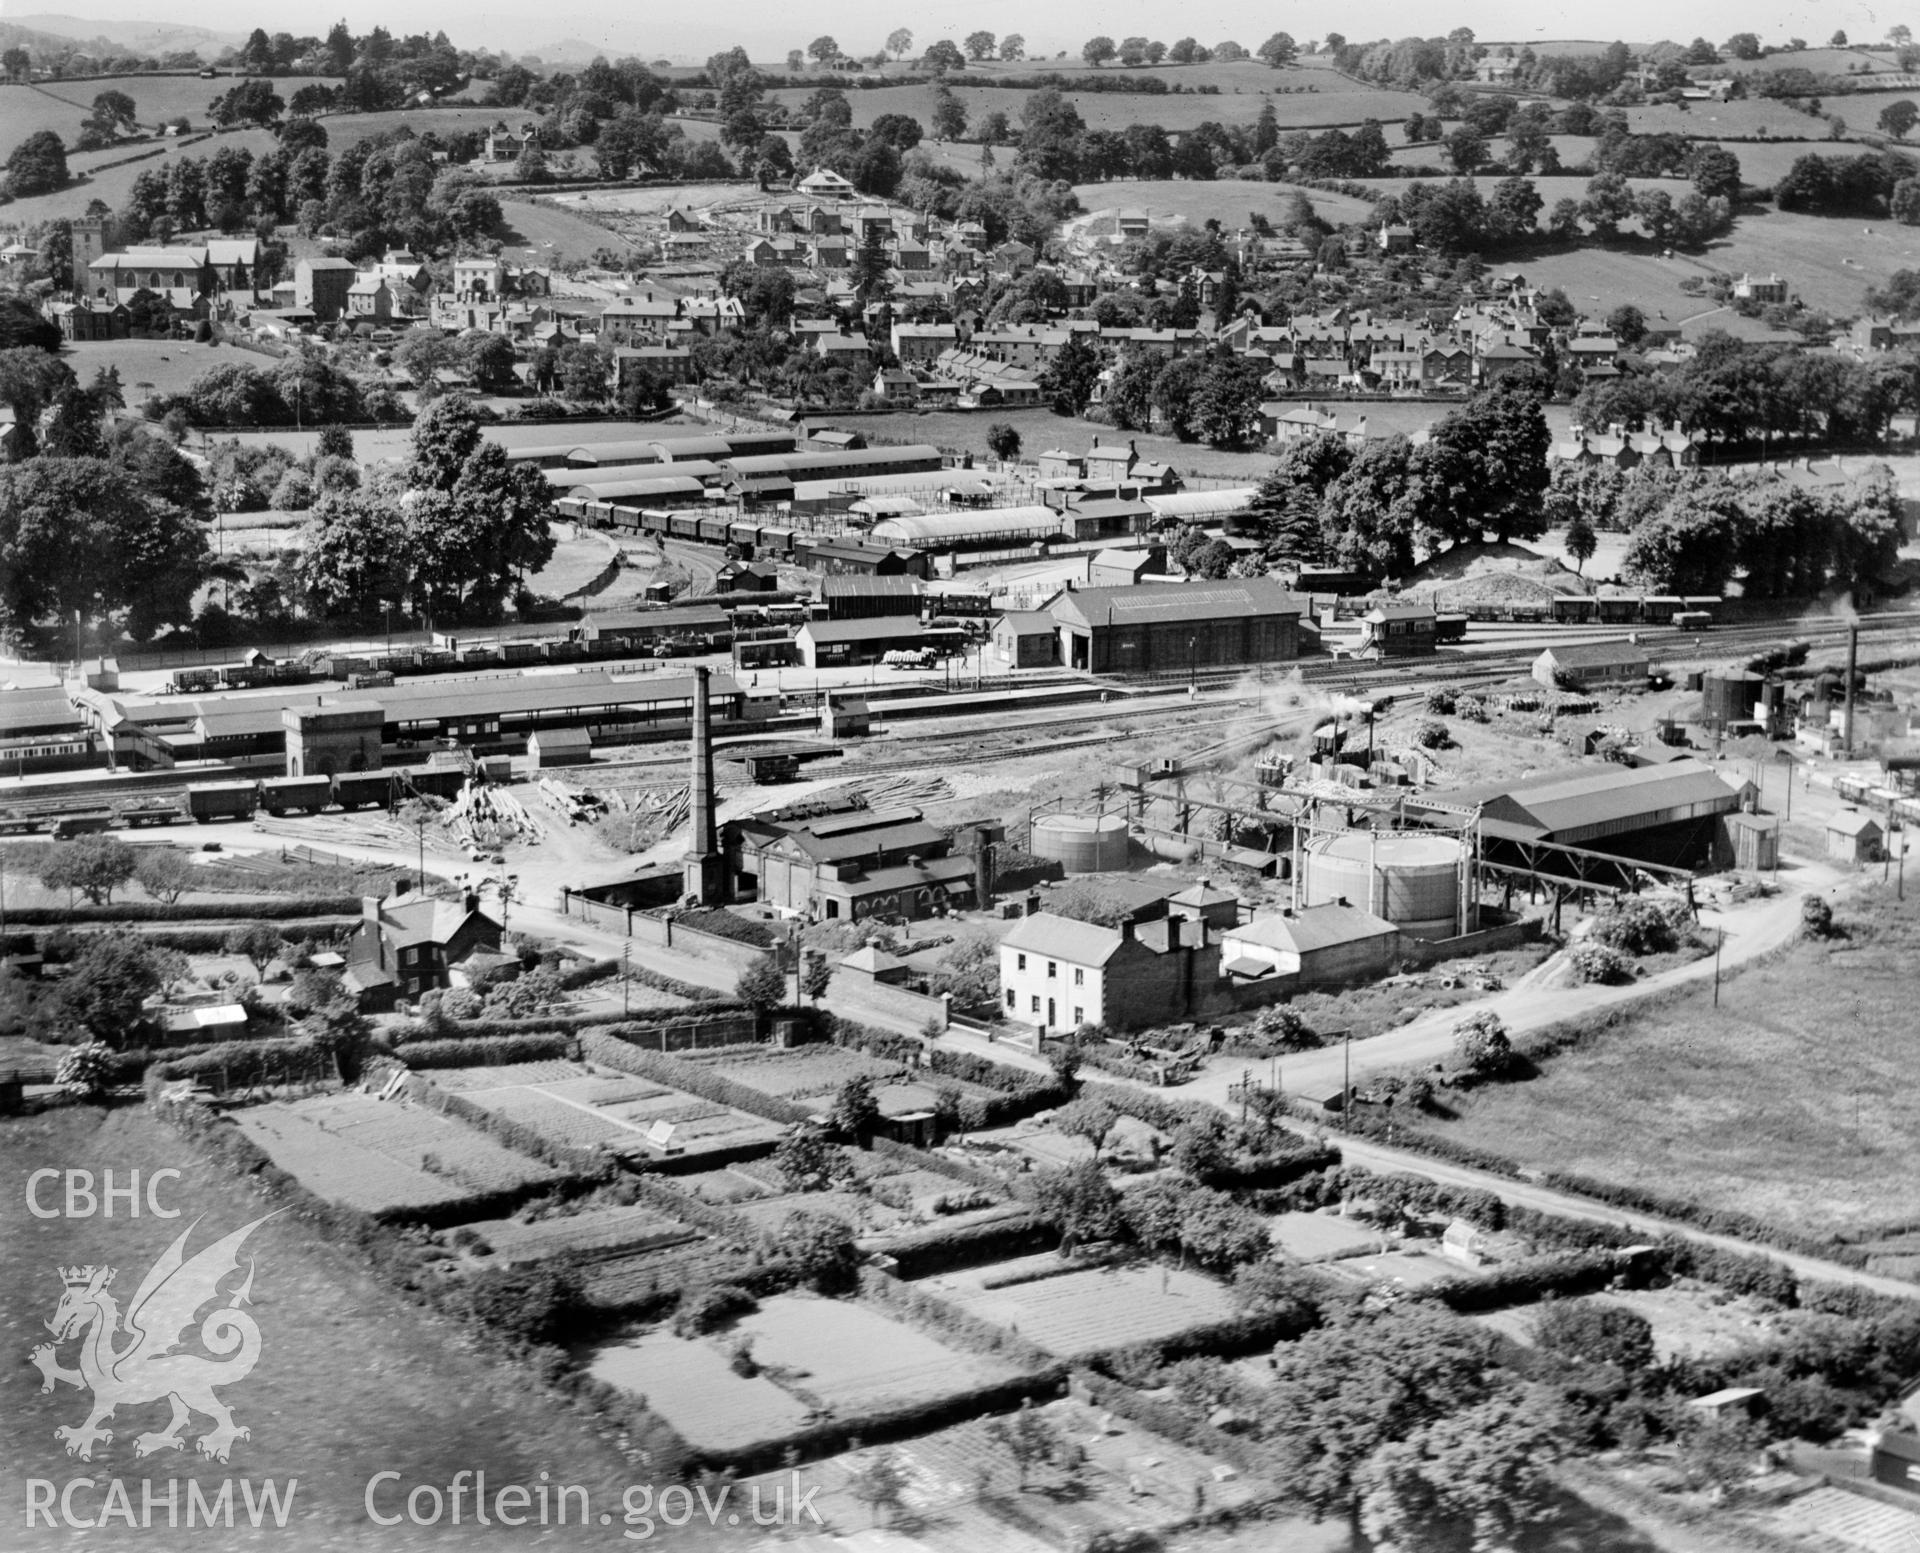 View of the Severn Valley Gas Co. works at Welshpool, also showing railway station with trains and Smithfield market. Oblique aerial photograph, 5?x4? BW glass plate.